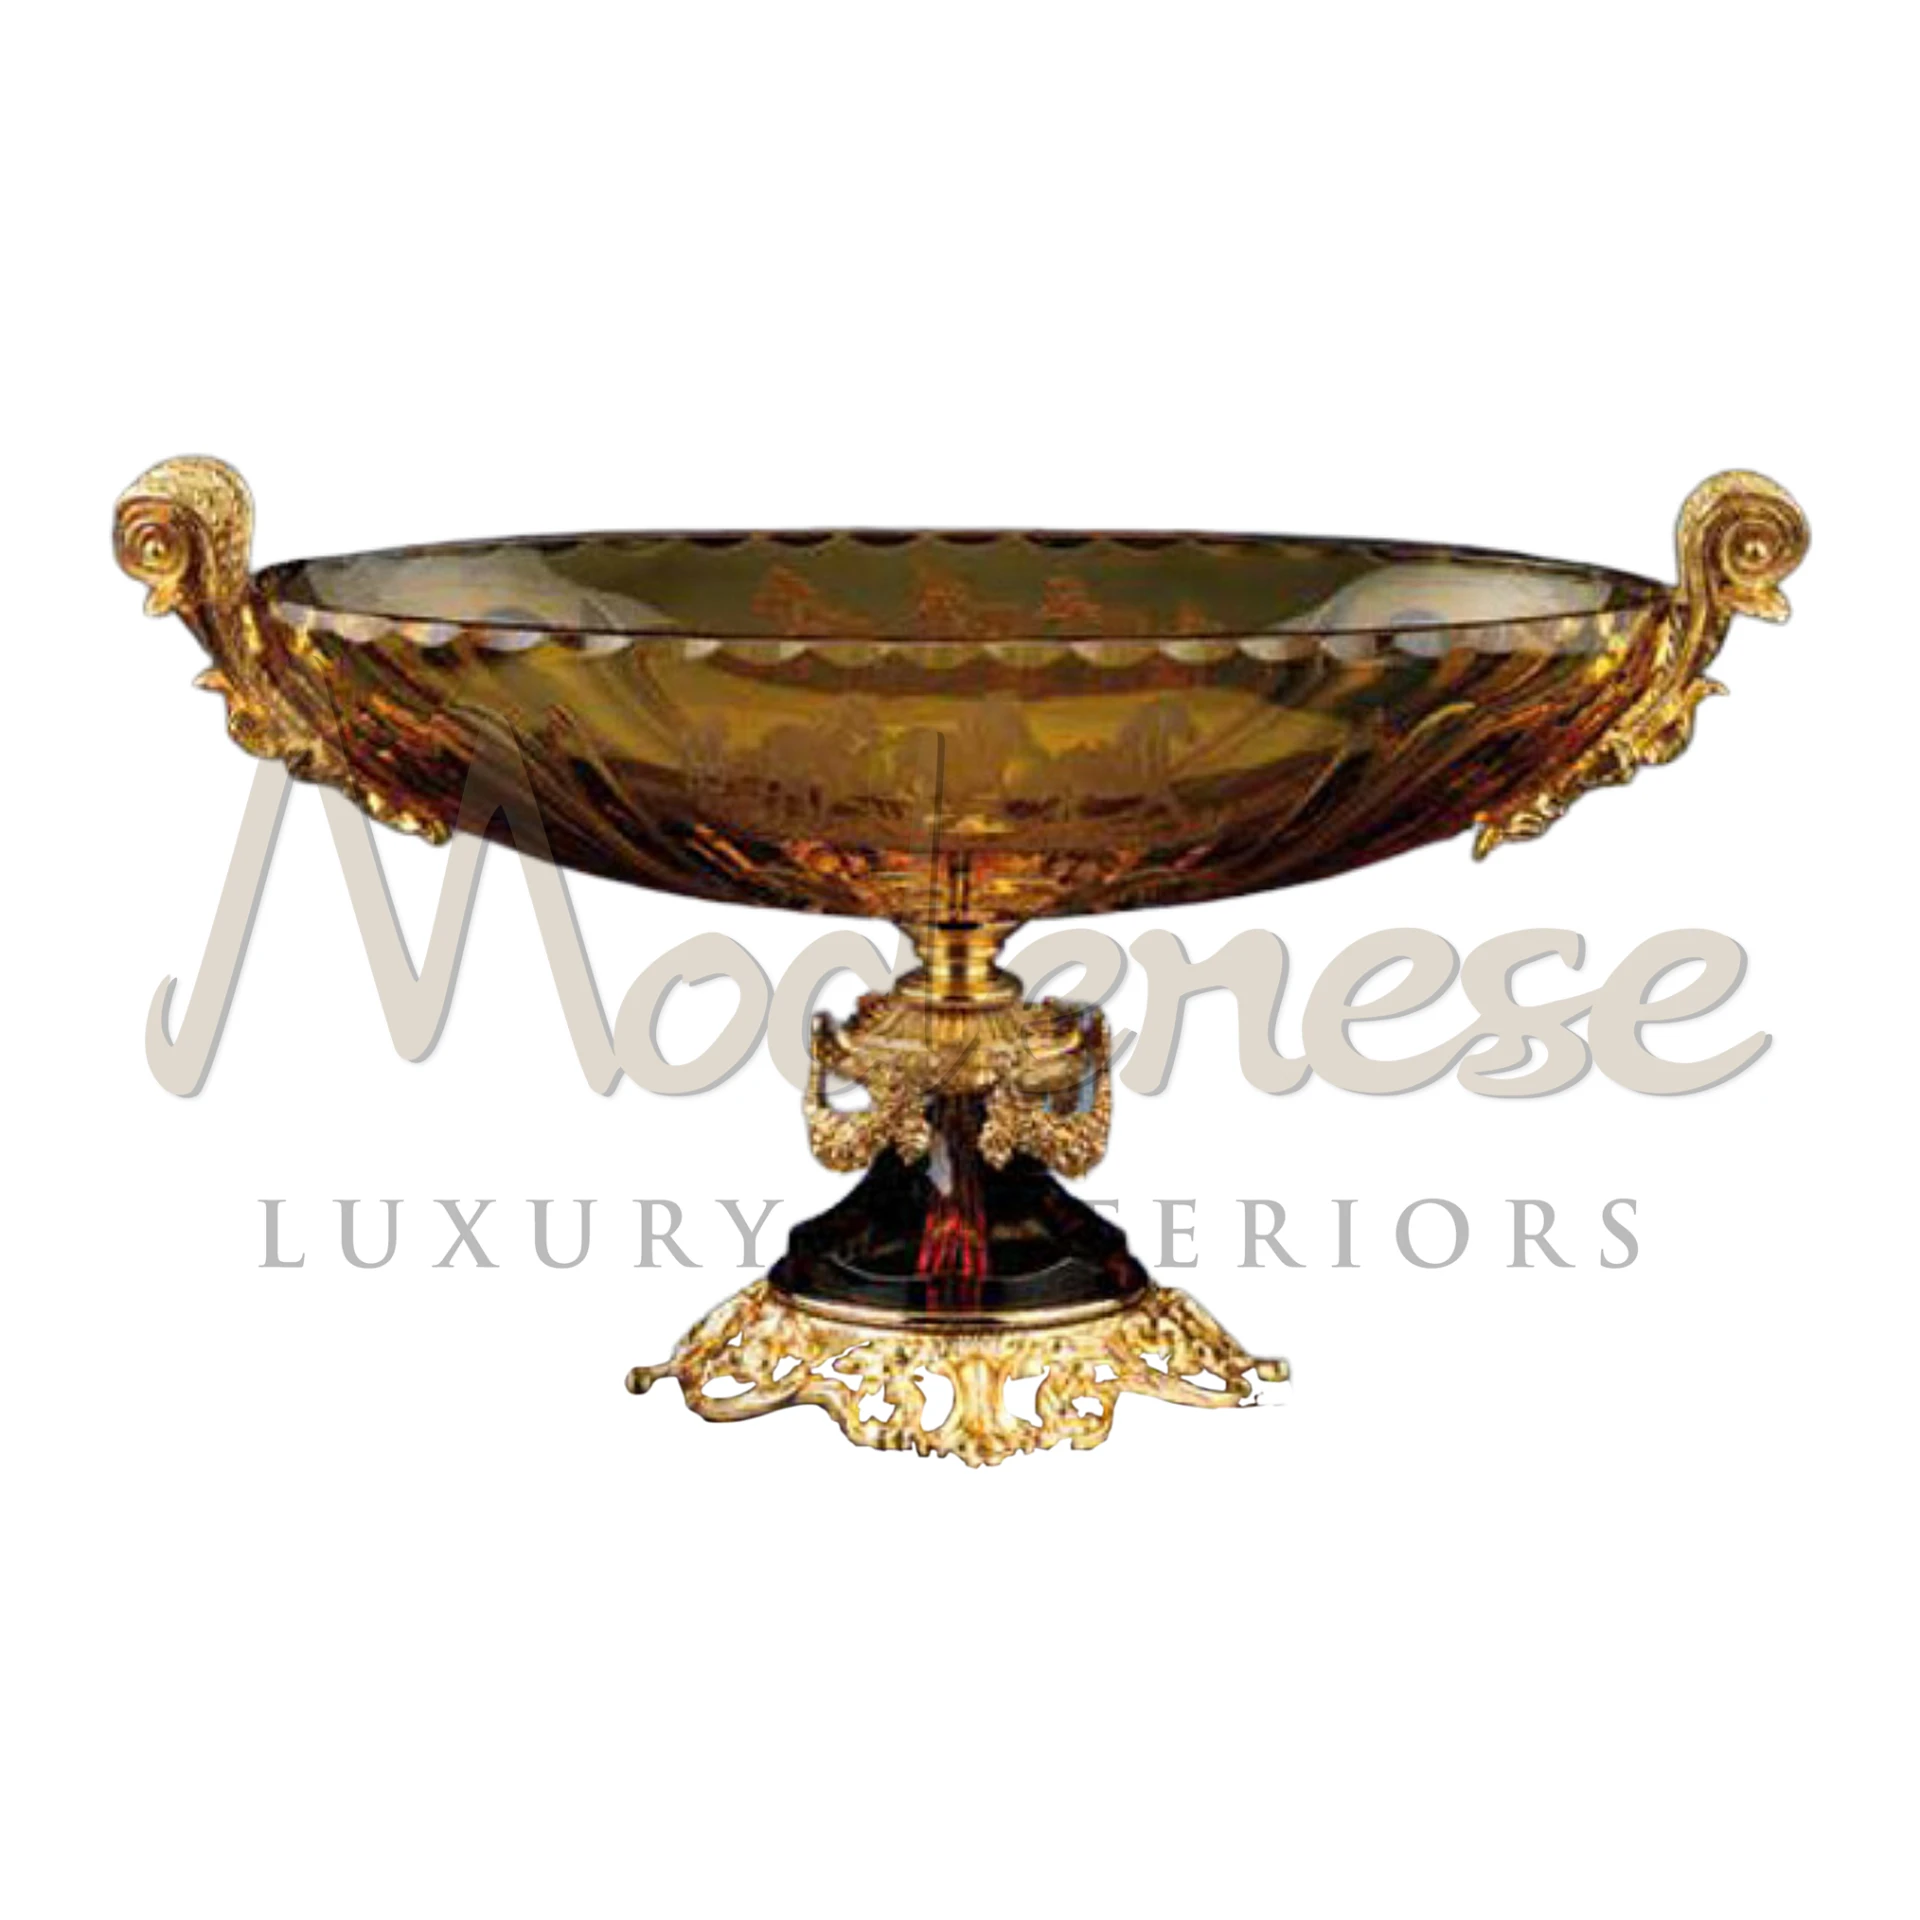 Modenese traditional ornamented vase, with intricate designs in porcelain, crystal, or metal, perfect for luxurious, classic, and baroque interiors.






